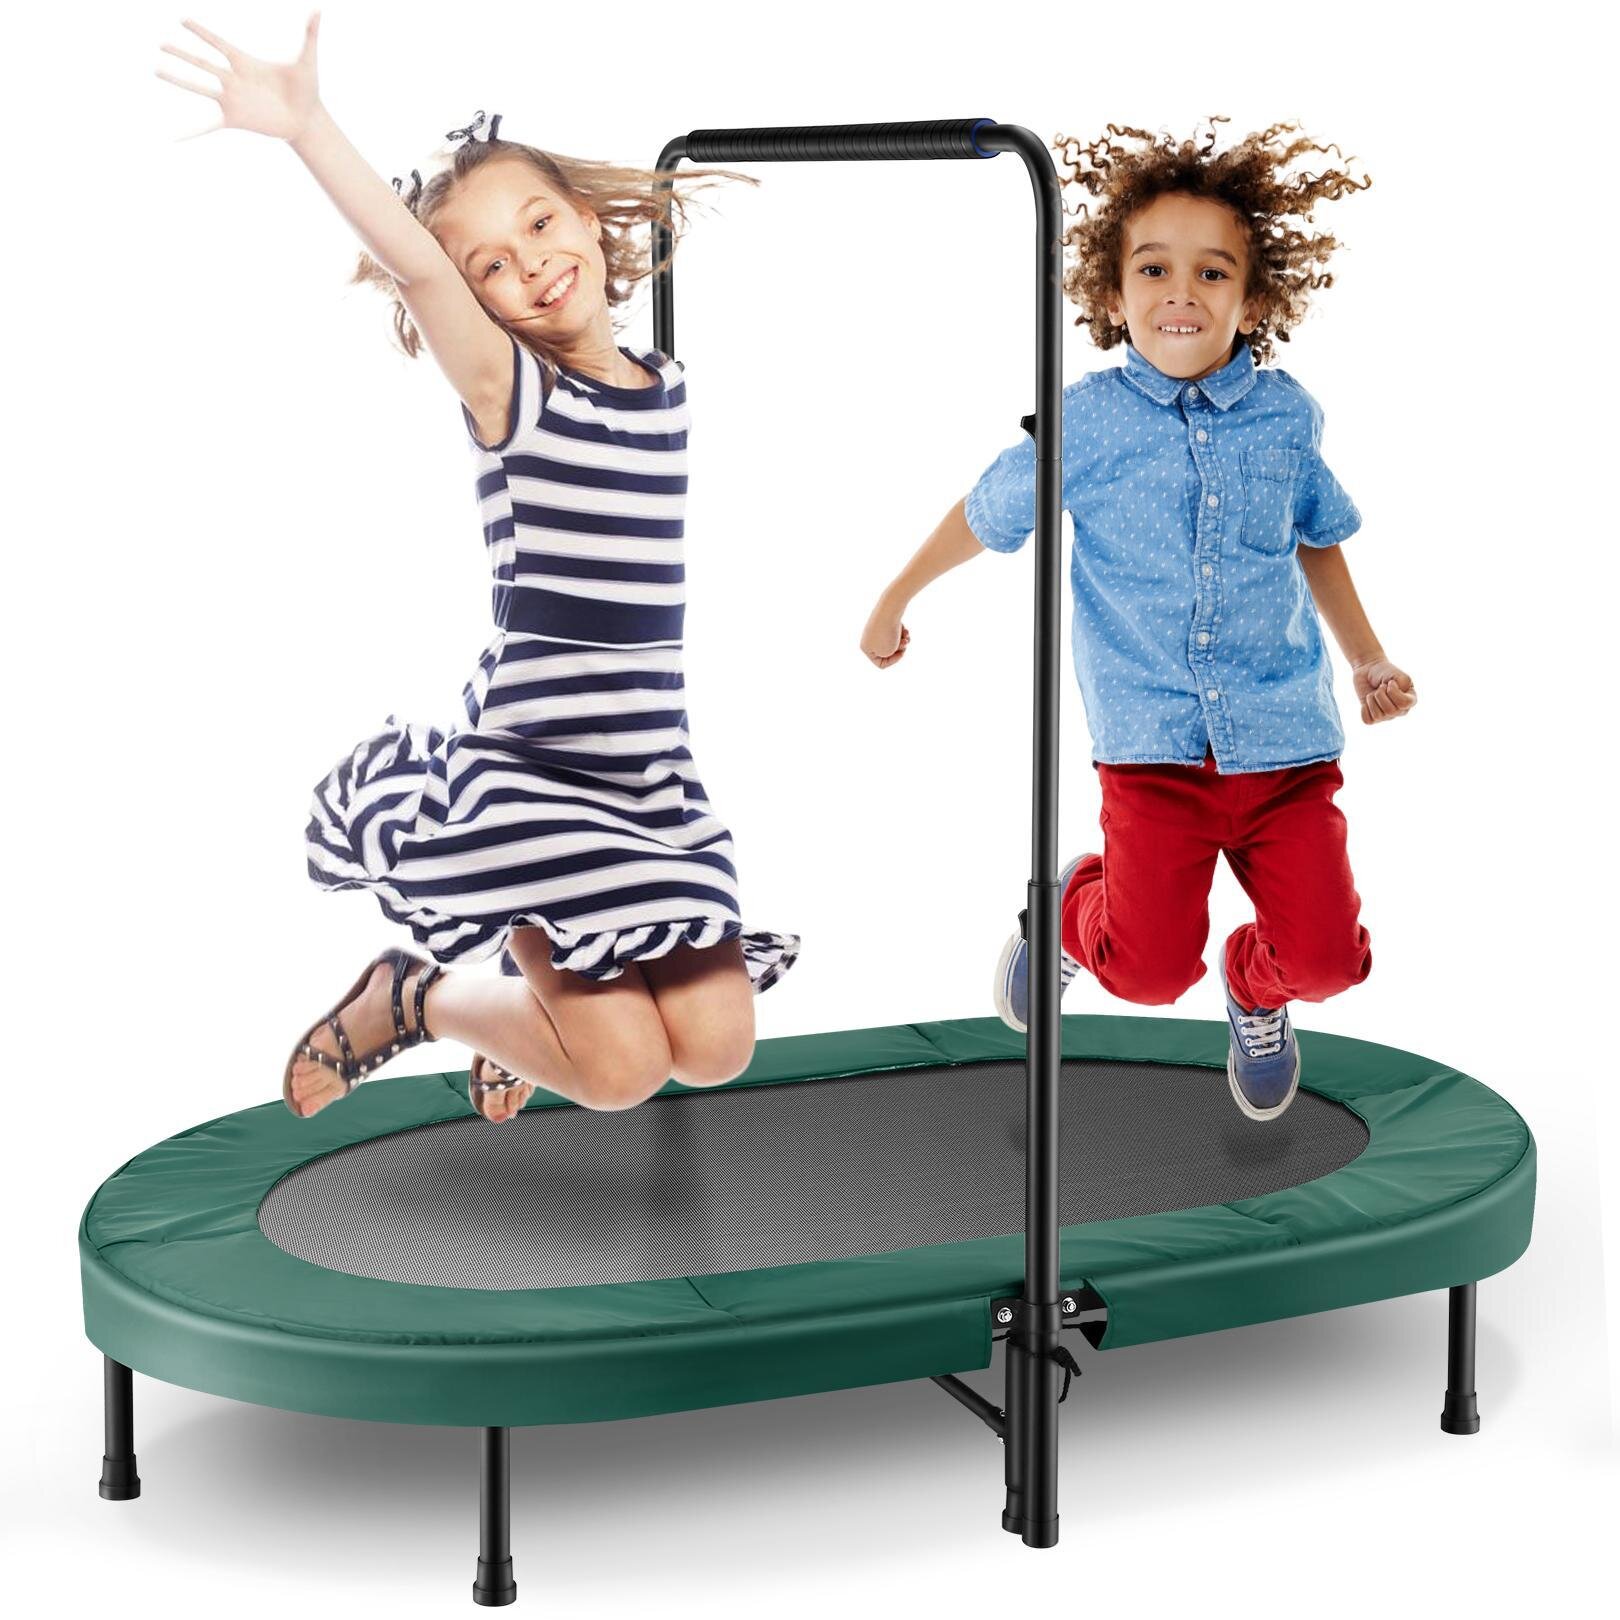 36inchs Kids Trampoline with Handle Safty Padded Cover Toddler Rebounder Fitness Trampoline Suitable for Indoor and Outdoor Mini Trampoline for Kids 